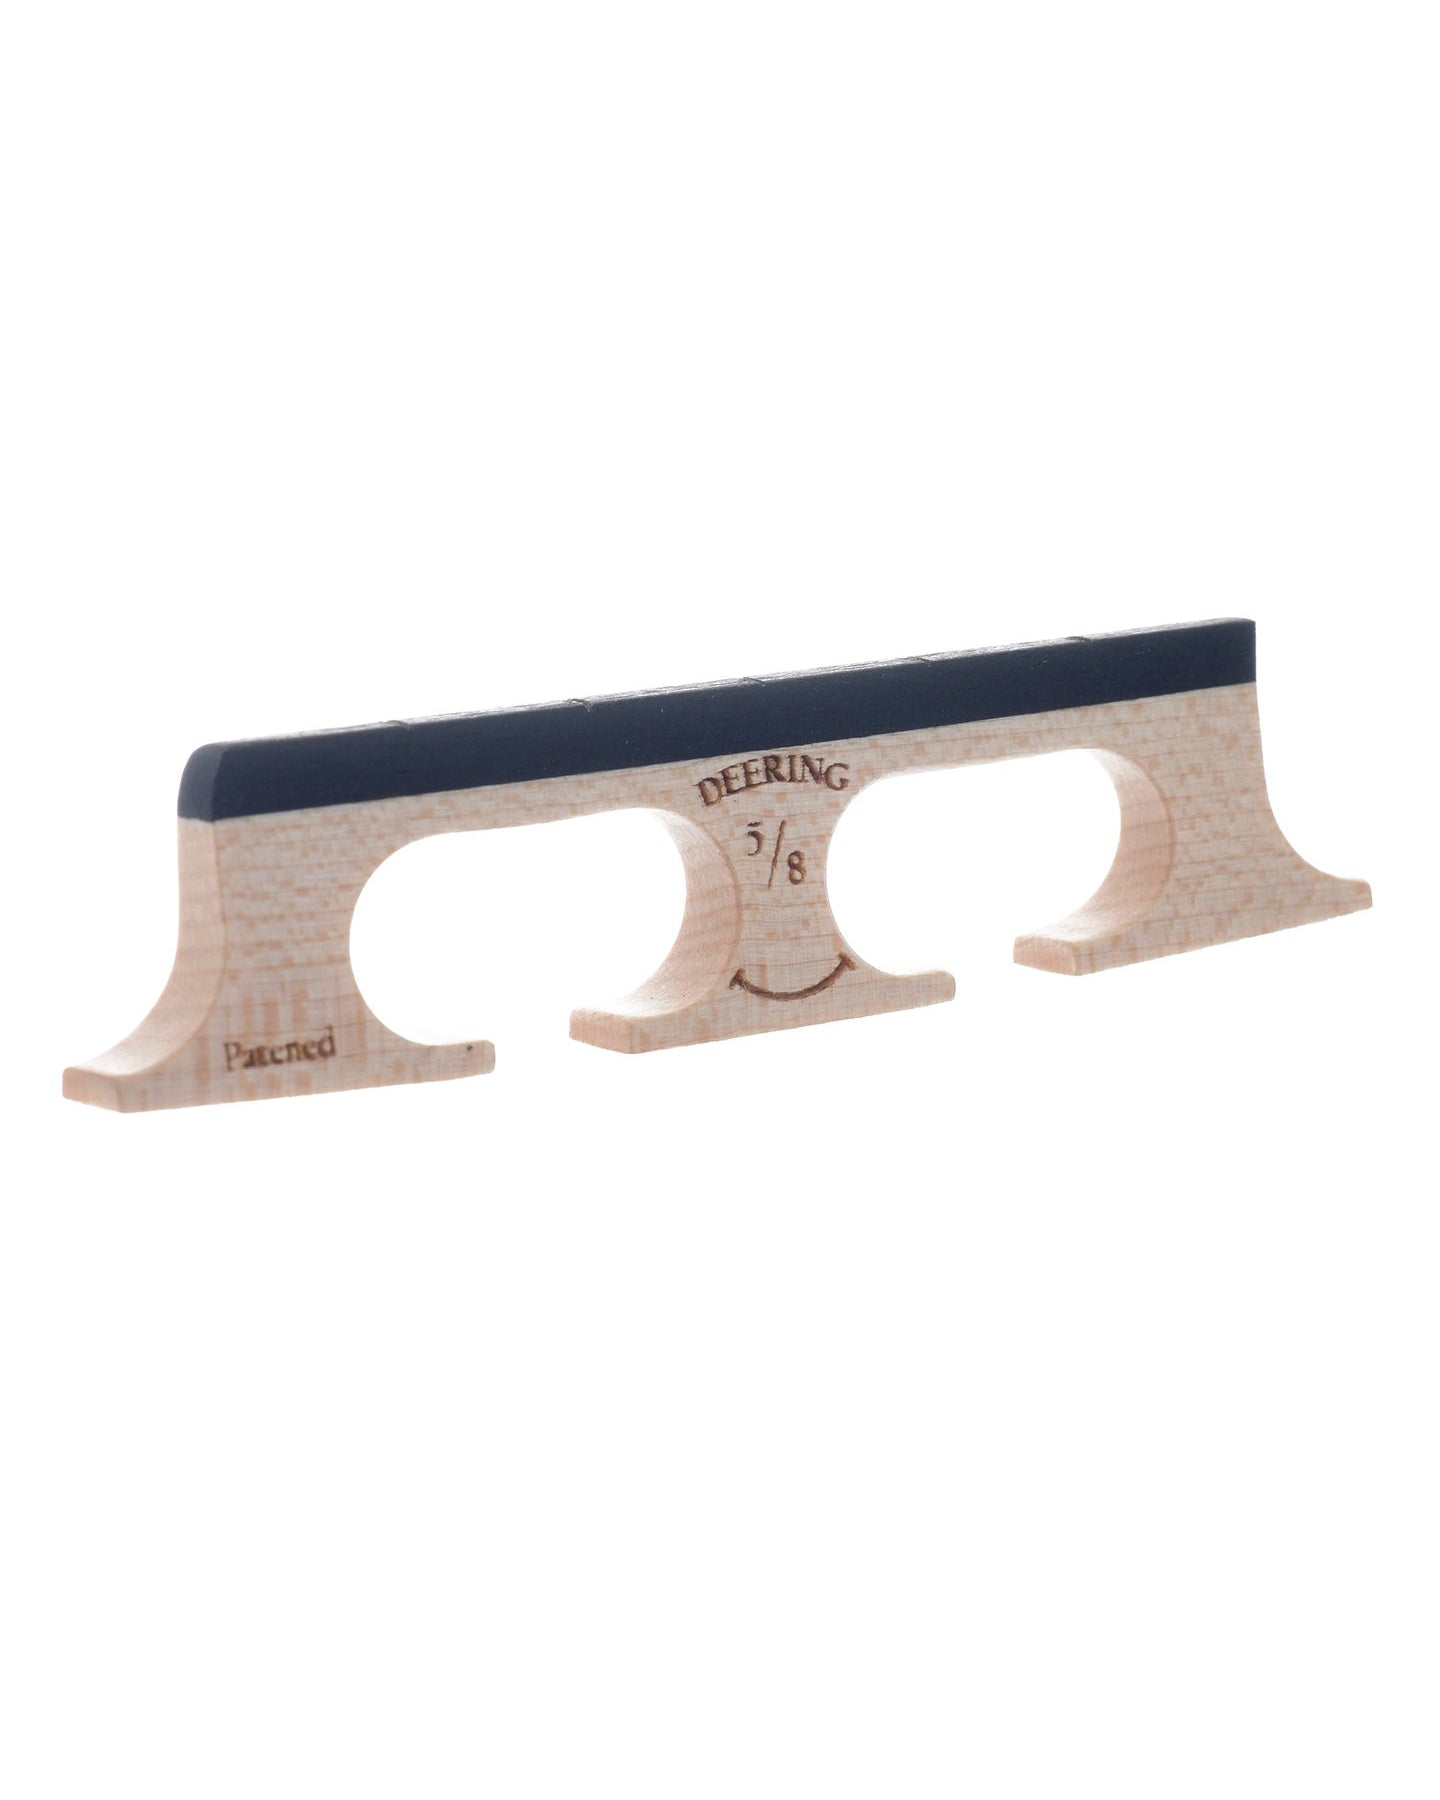 Front and Side of Deering 5/8" Smile Banjo Bridge, with Curved Feet